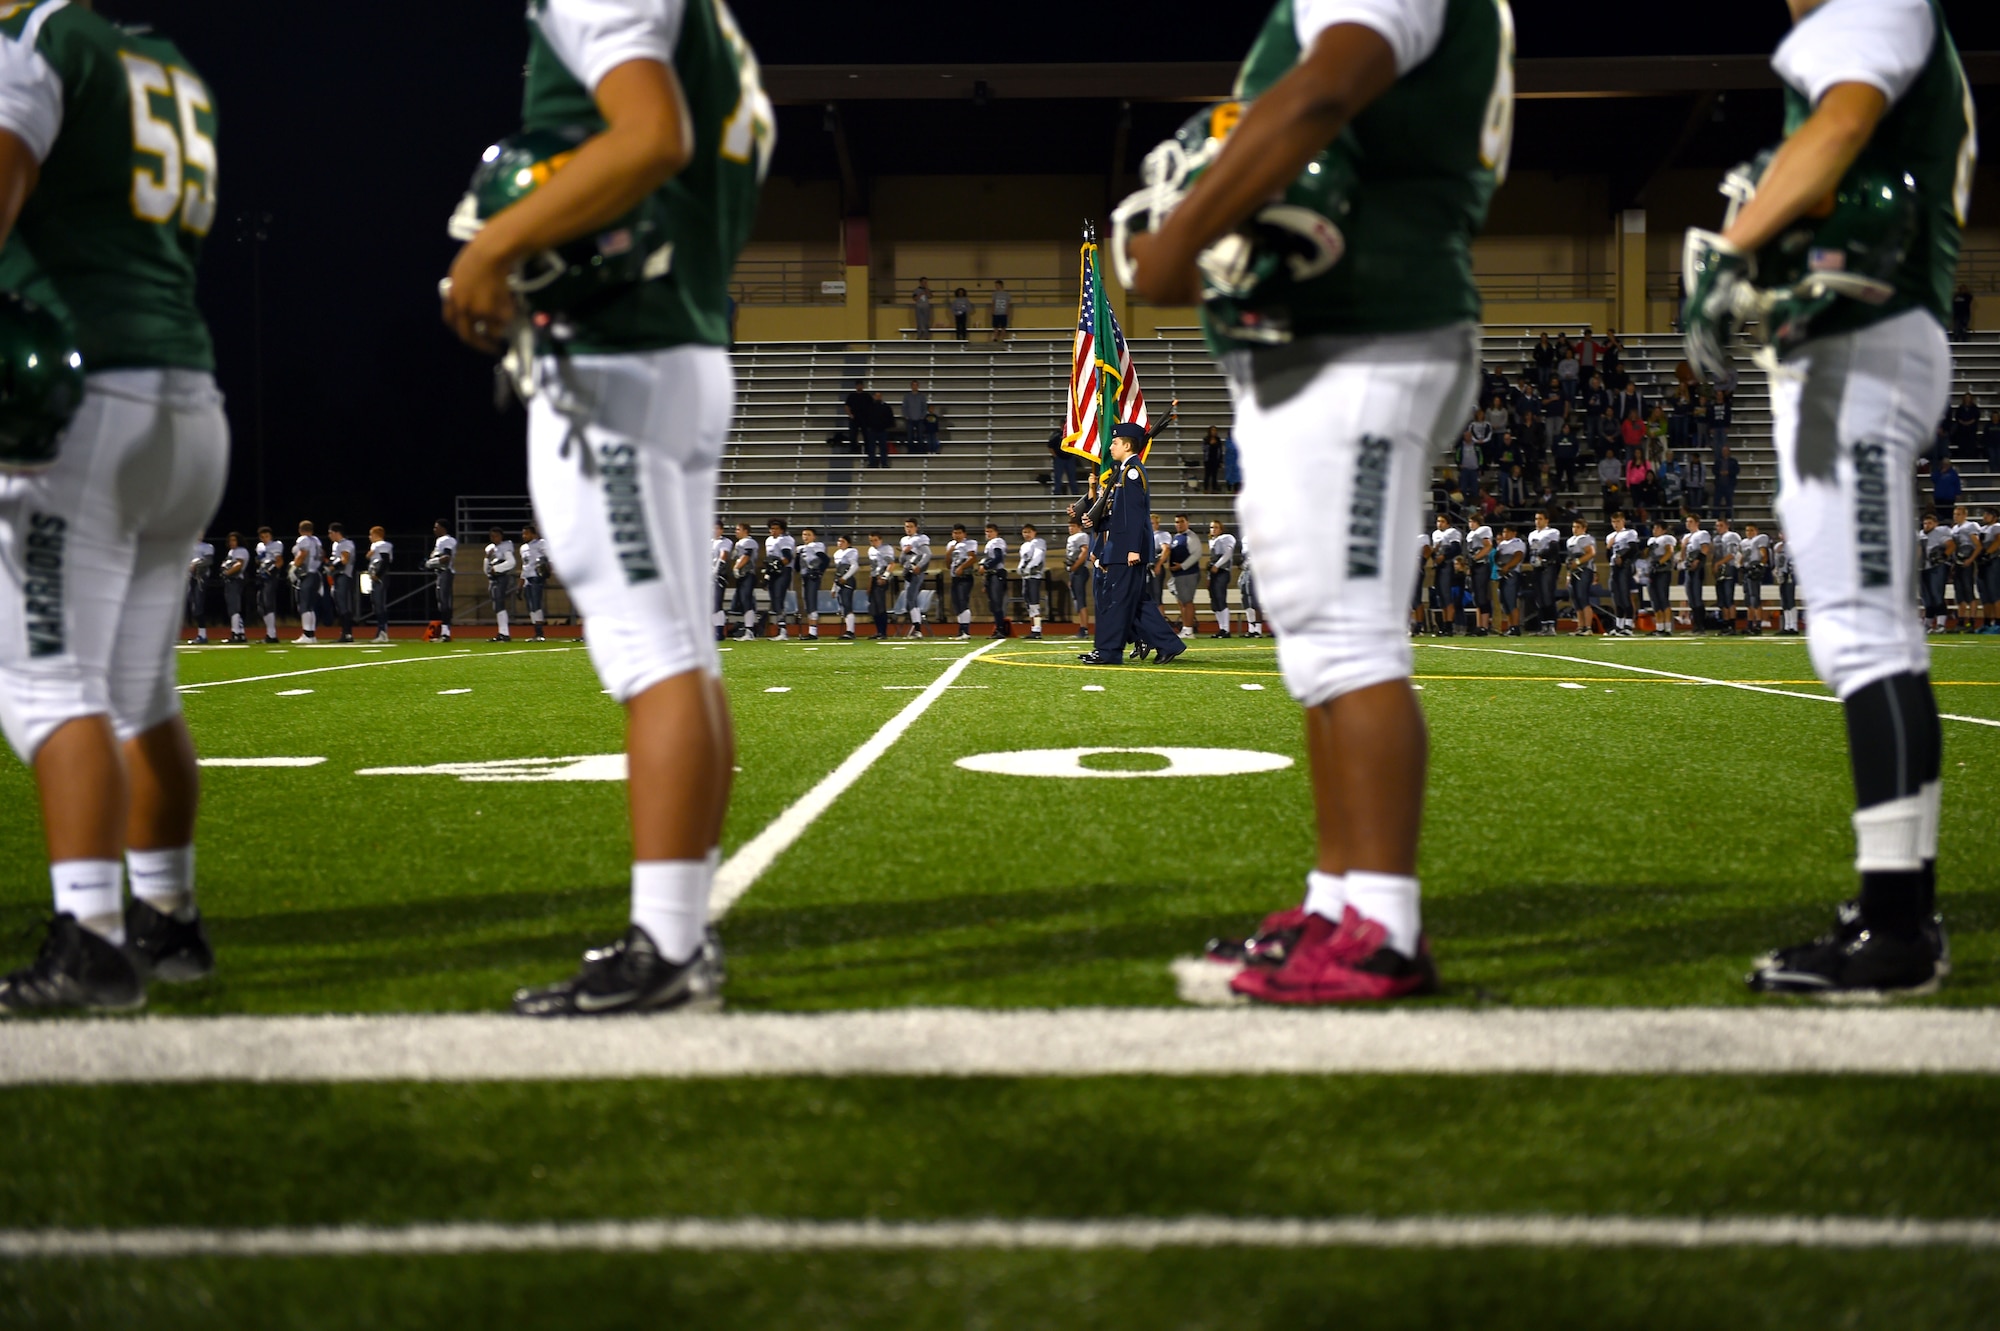 Clover Park and River Ridge High School football players line the field during the presentation of colors and National Anthem prior to the start of their football game and Warrior Night Oct. 16, 2015 in Lakewood, Wash. Three McChord Airmen were invited to be honored during Warrior night for their selflessness and service to others.(U.S. Air Force photo/Senior Airman Naomi Griego)